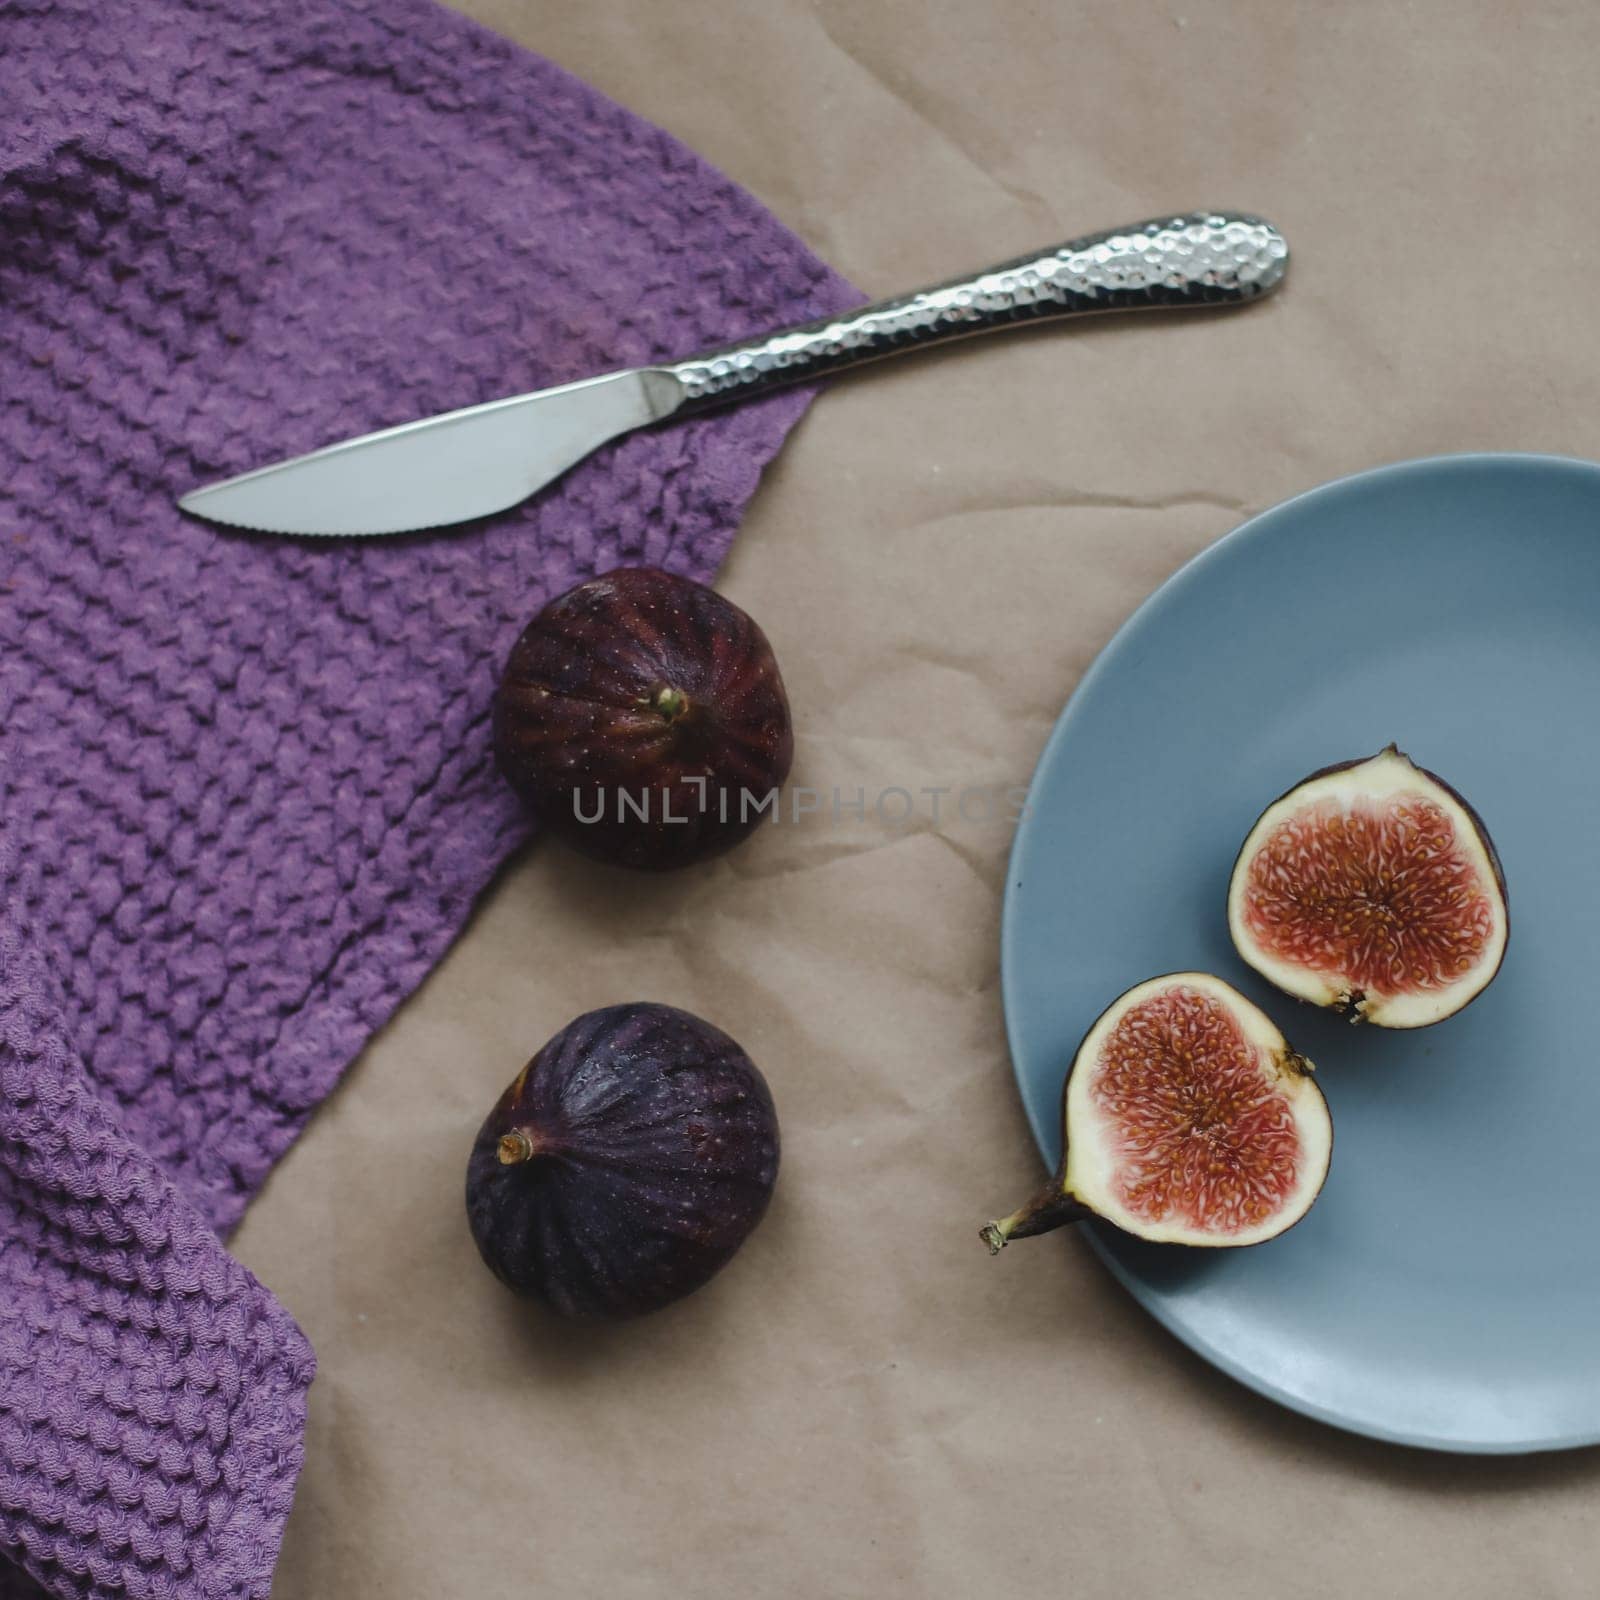 Rustic still life with fresh ripe figs. High quality photo